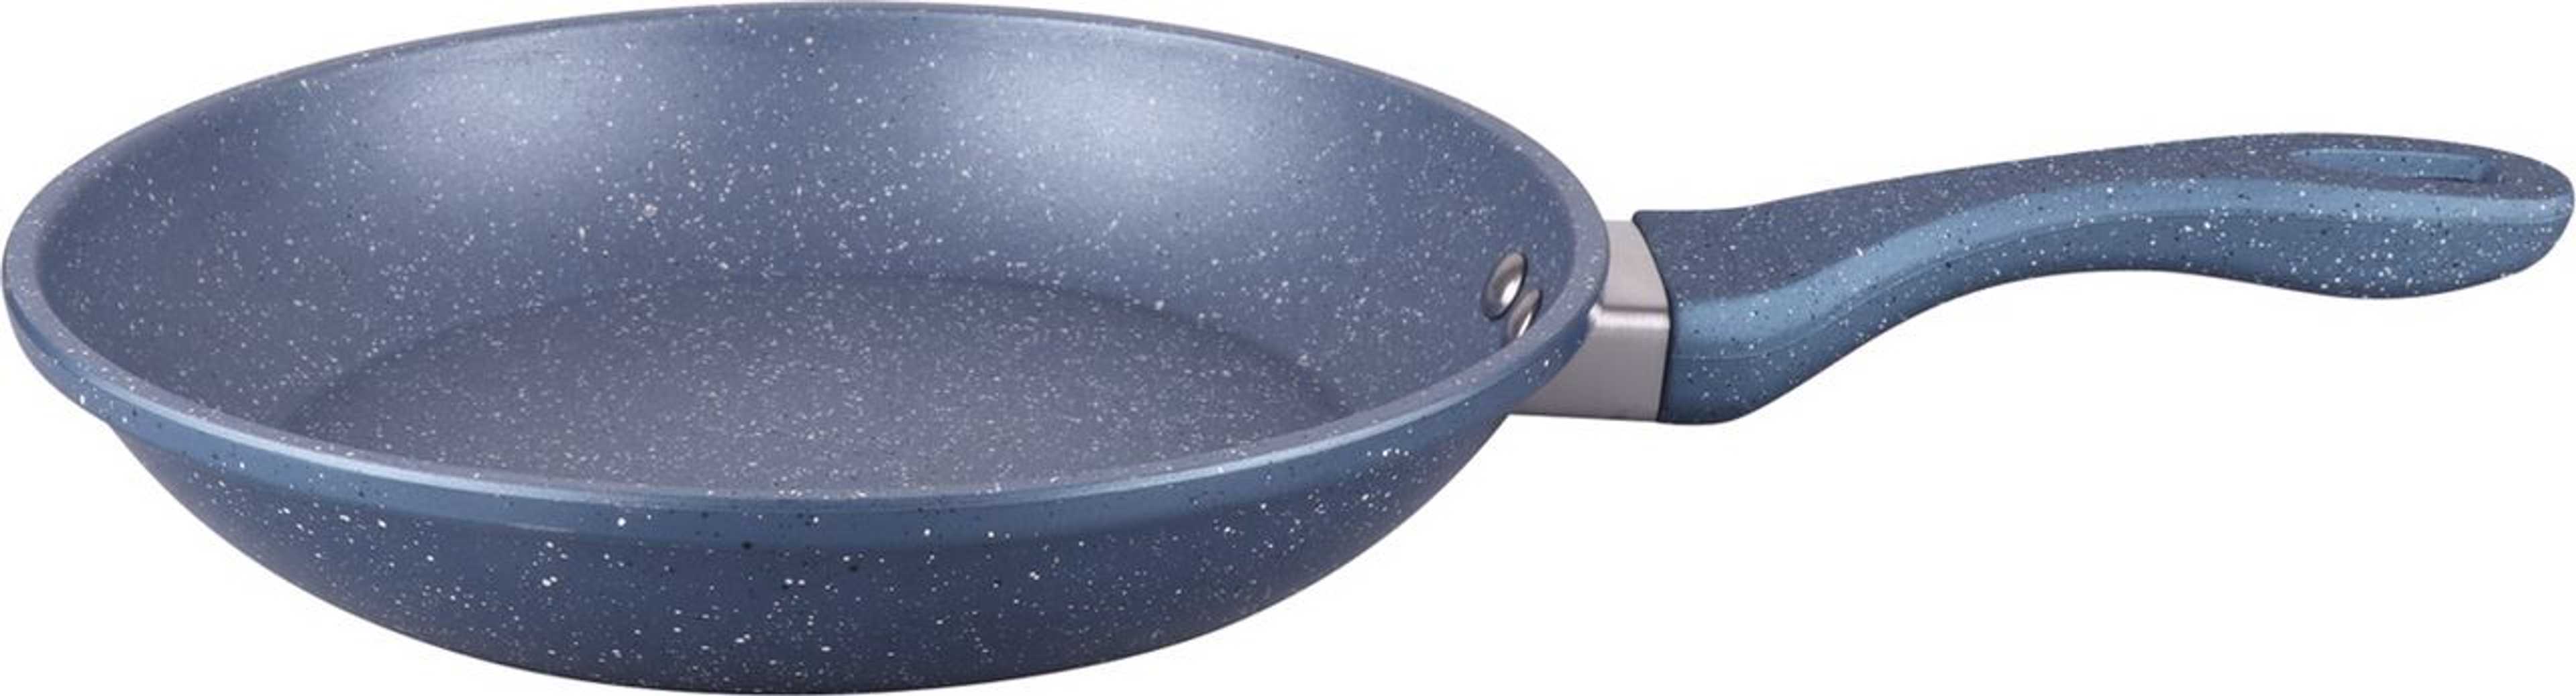 Dessini Granite Coating Fry Pan 32 Cm For Kitchen Best Quality In Use